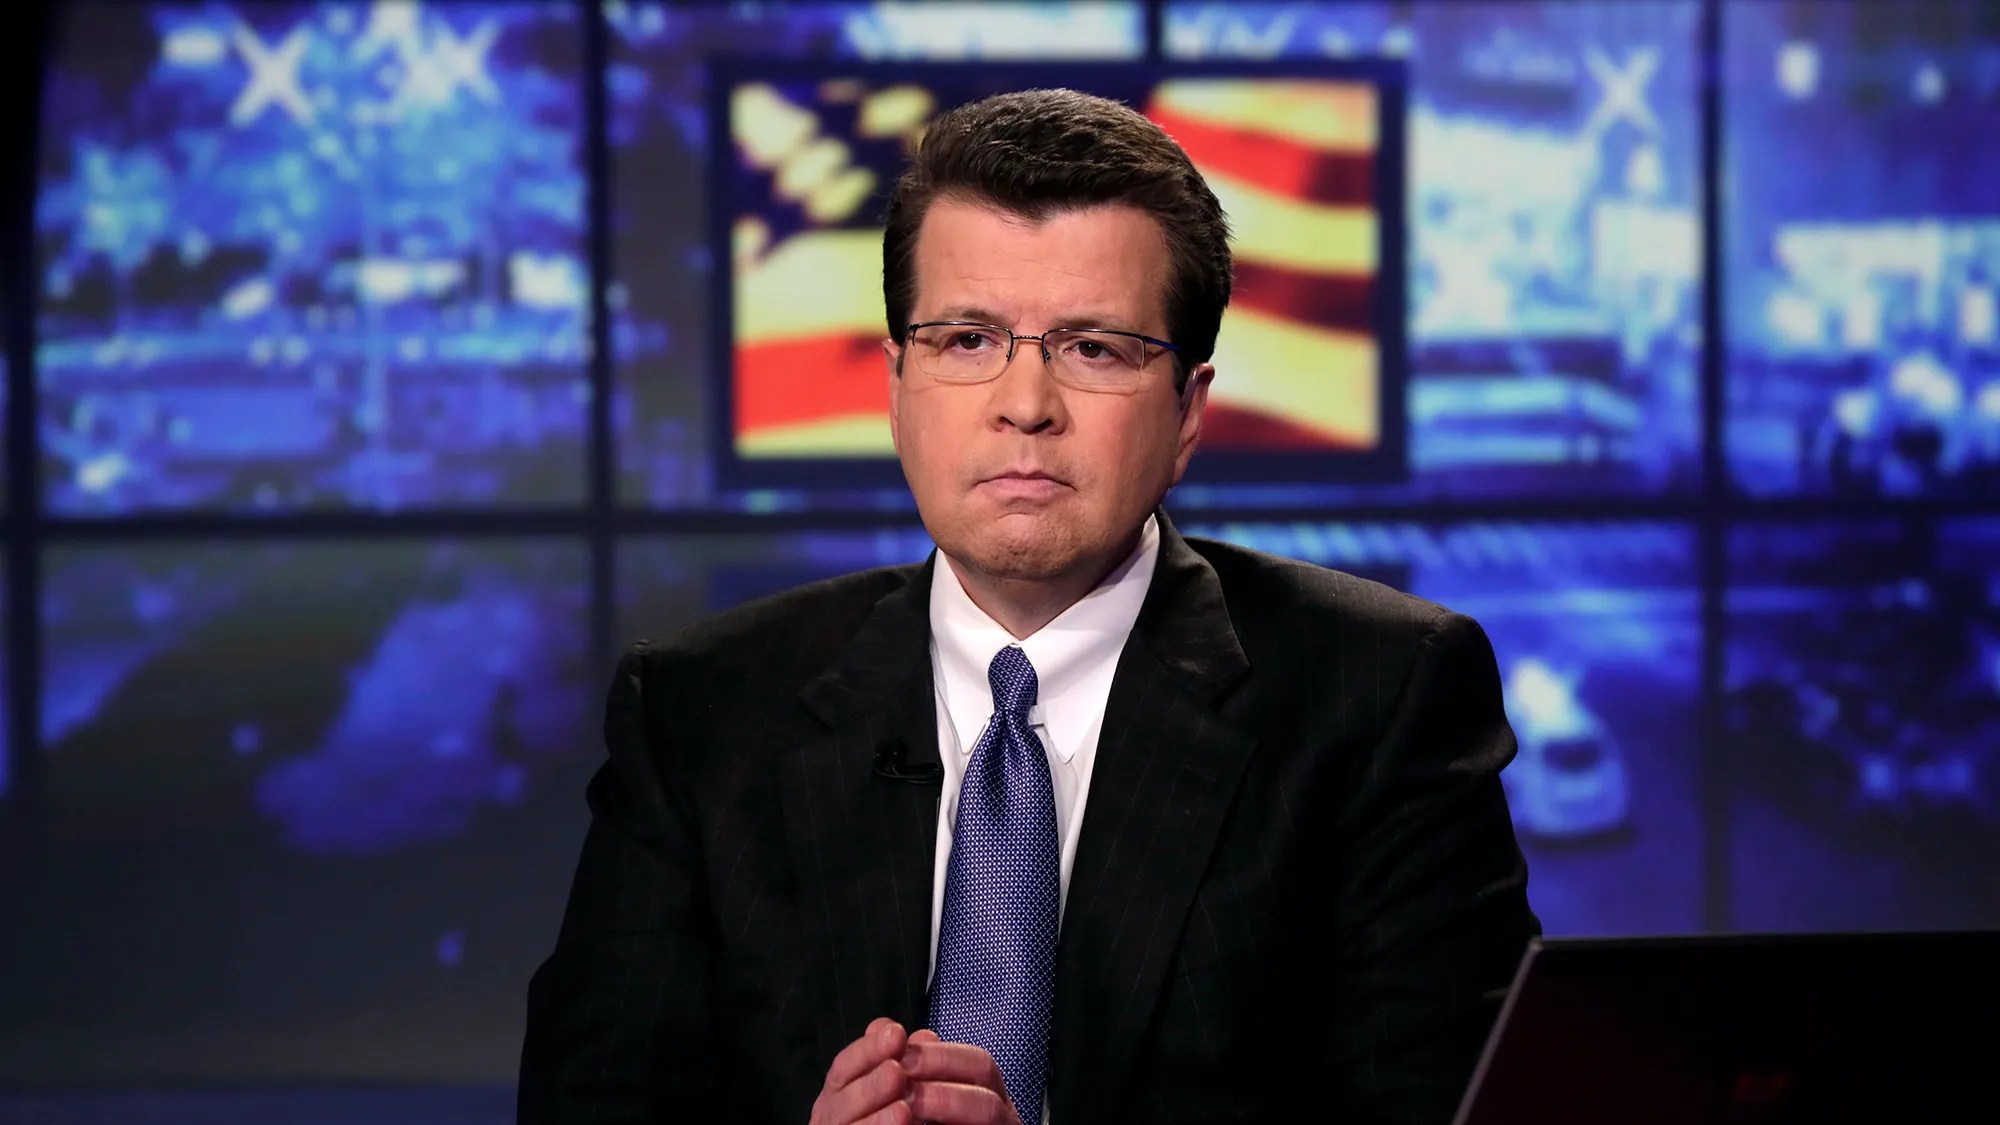 Neil Cavuto Loses It With Trump “We Don’t Work for You” Vanity Fair